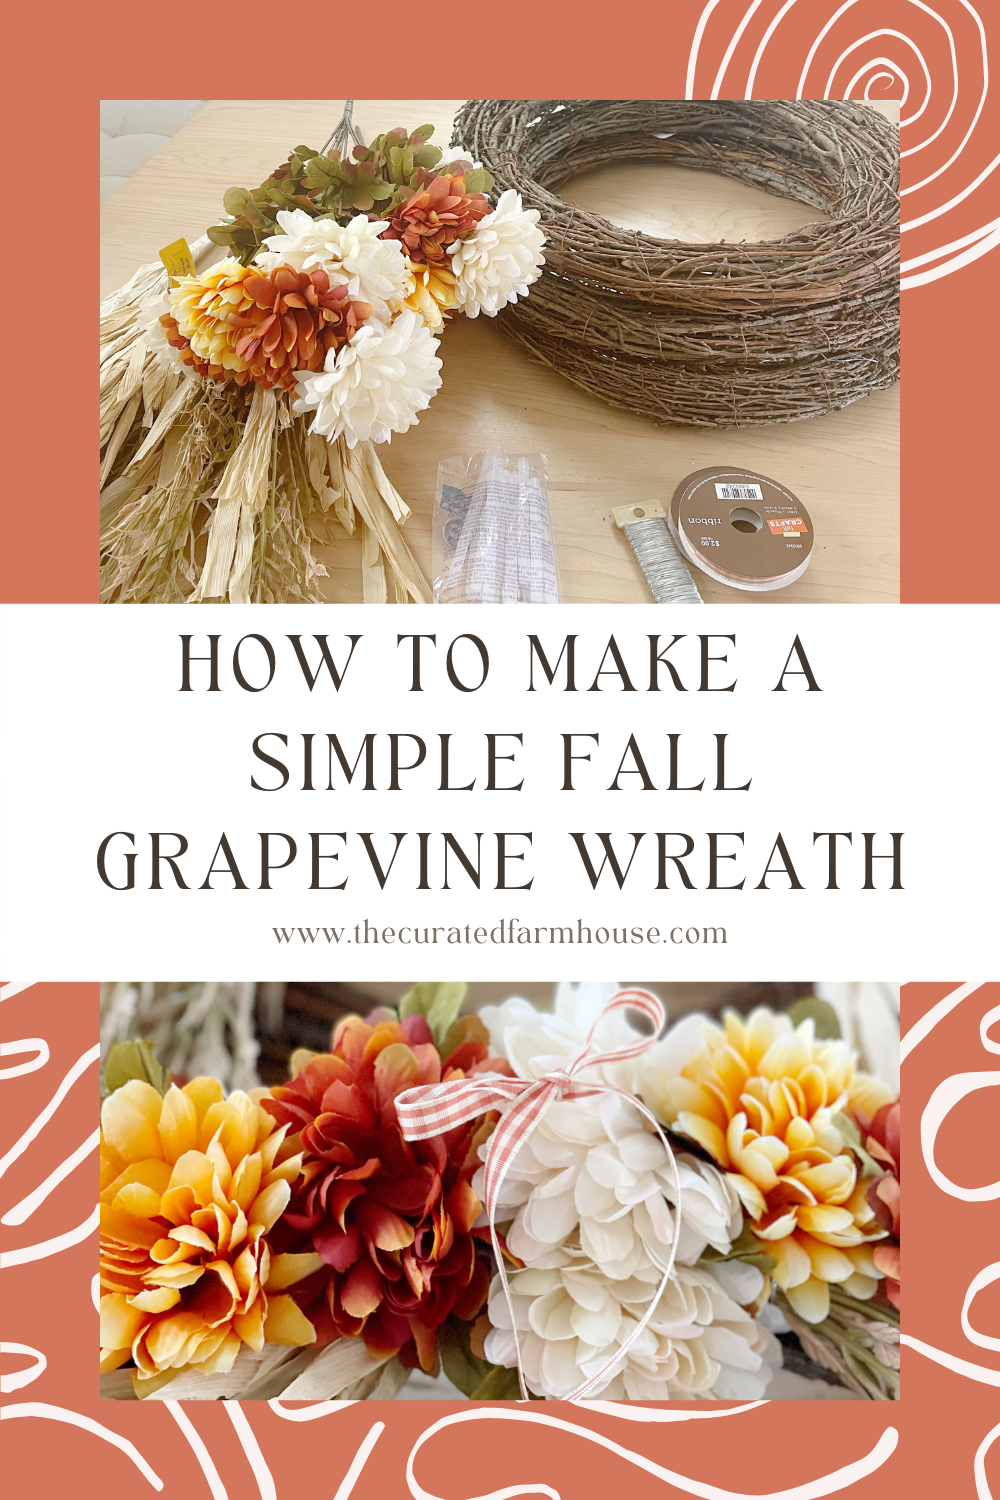 How To Make a Simple Fall Grapevine Wreath